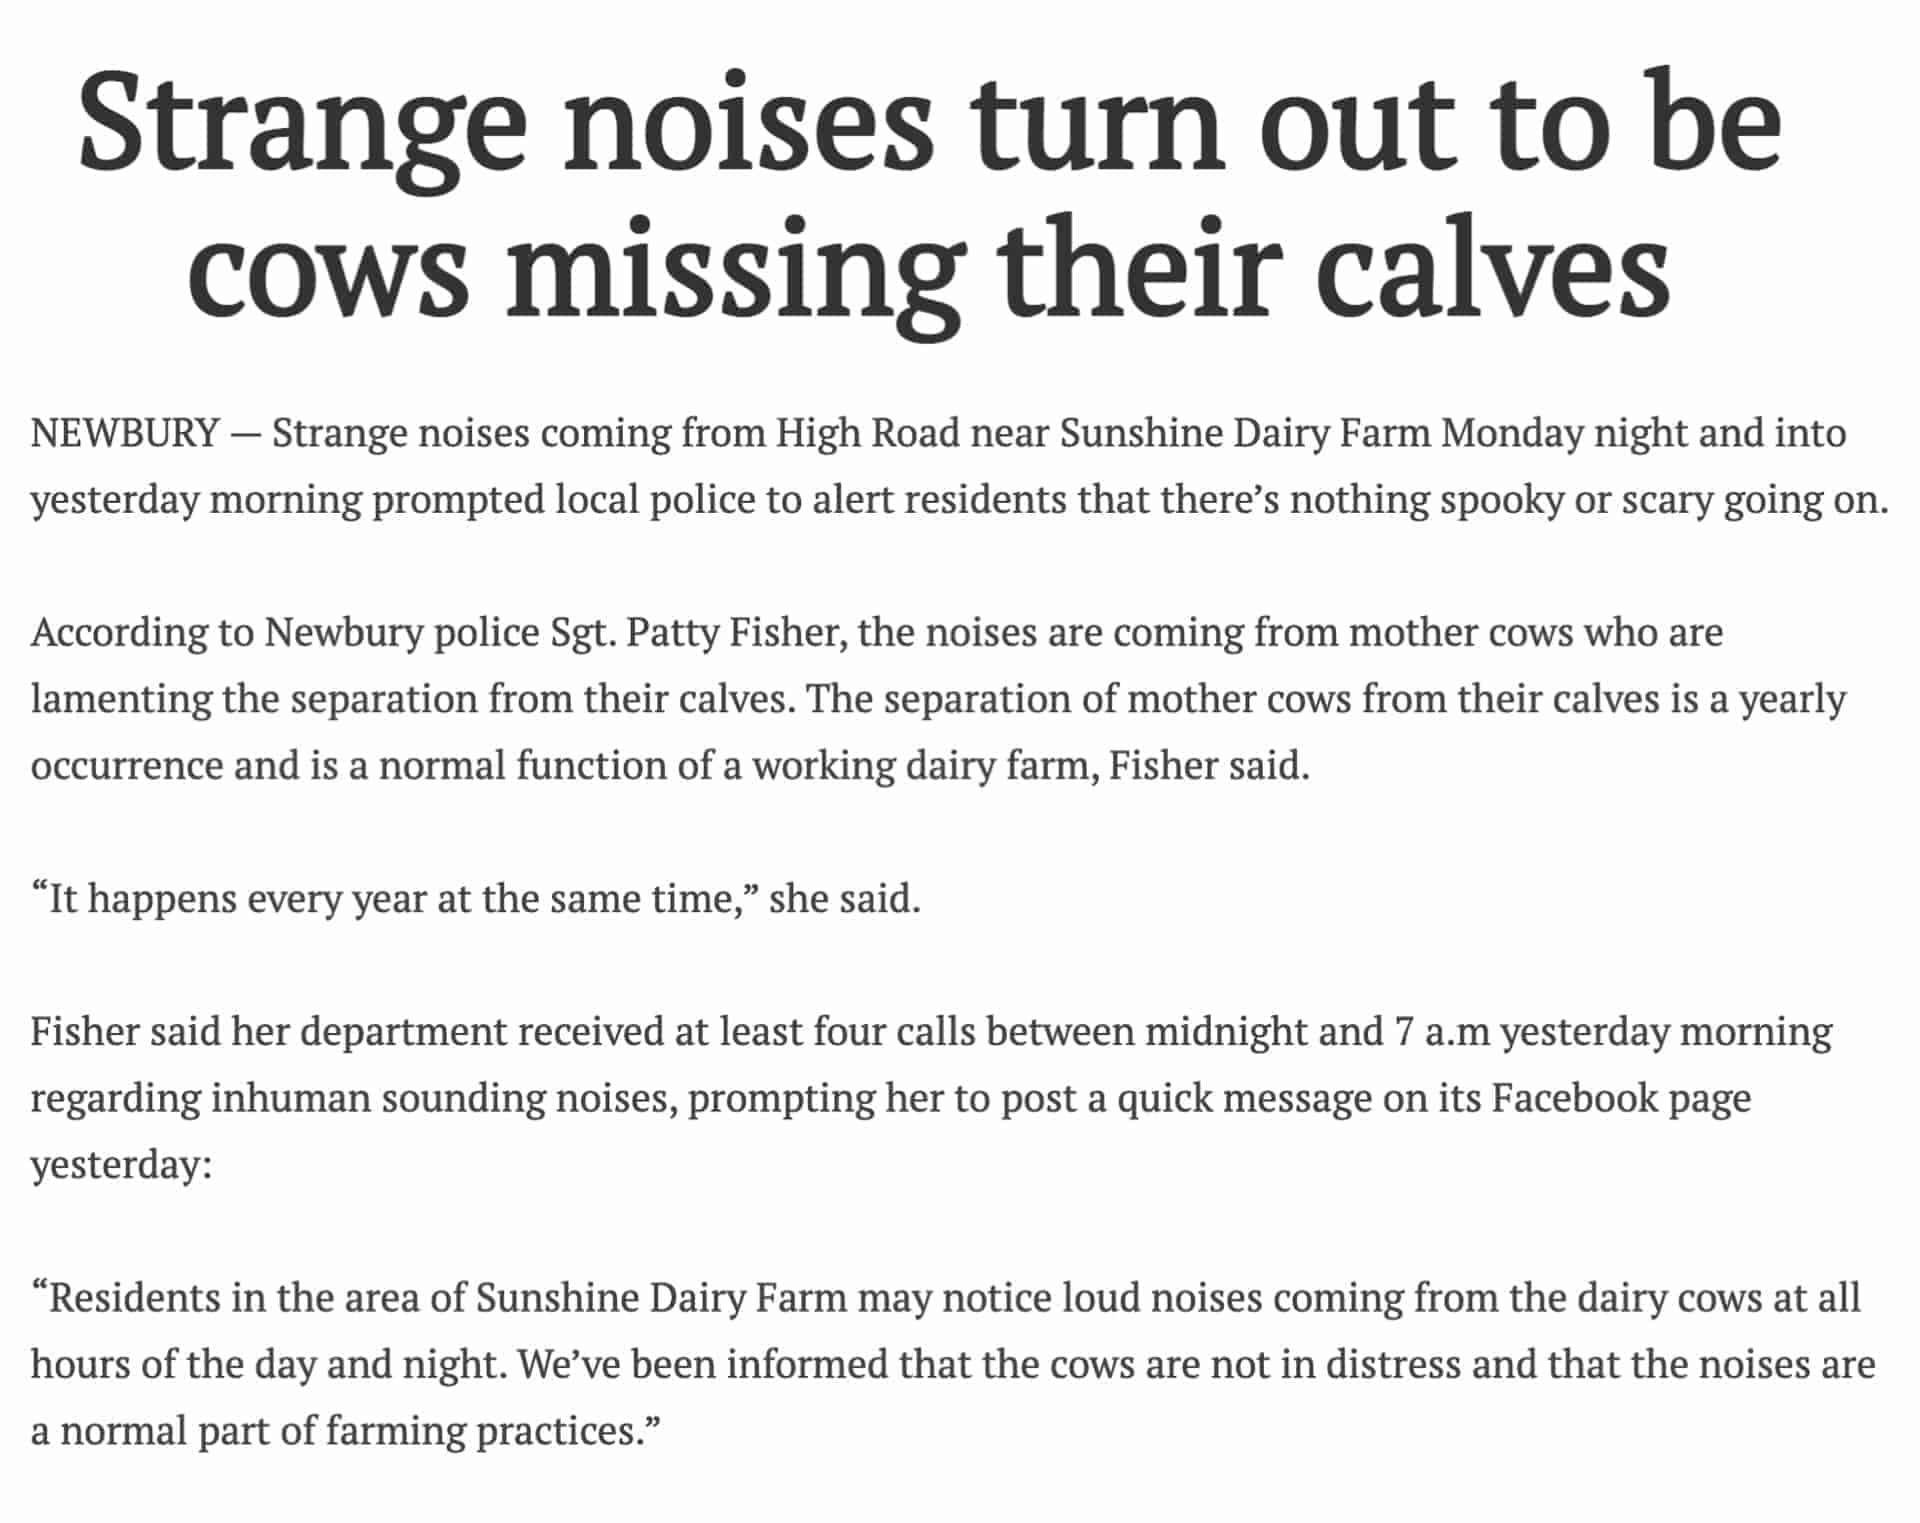 An excerpt from The Daily News article "Strange noises turn out to be cows missing their calves"